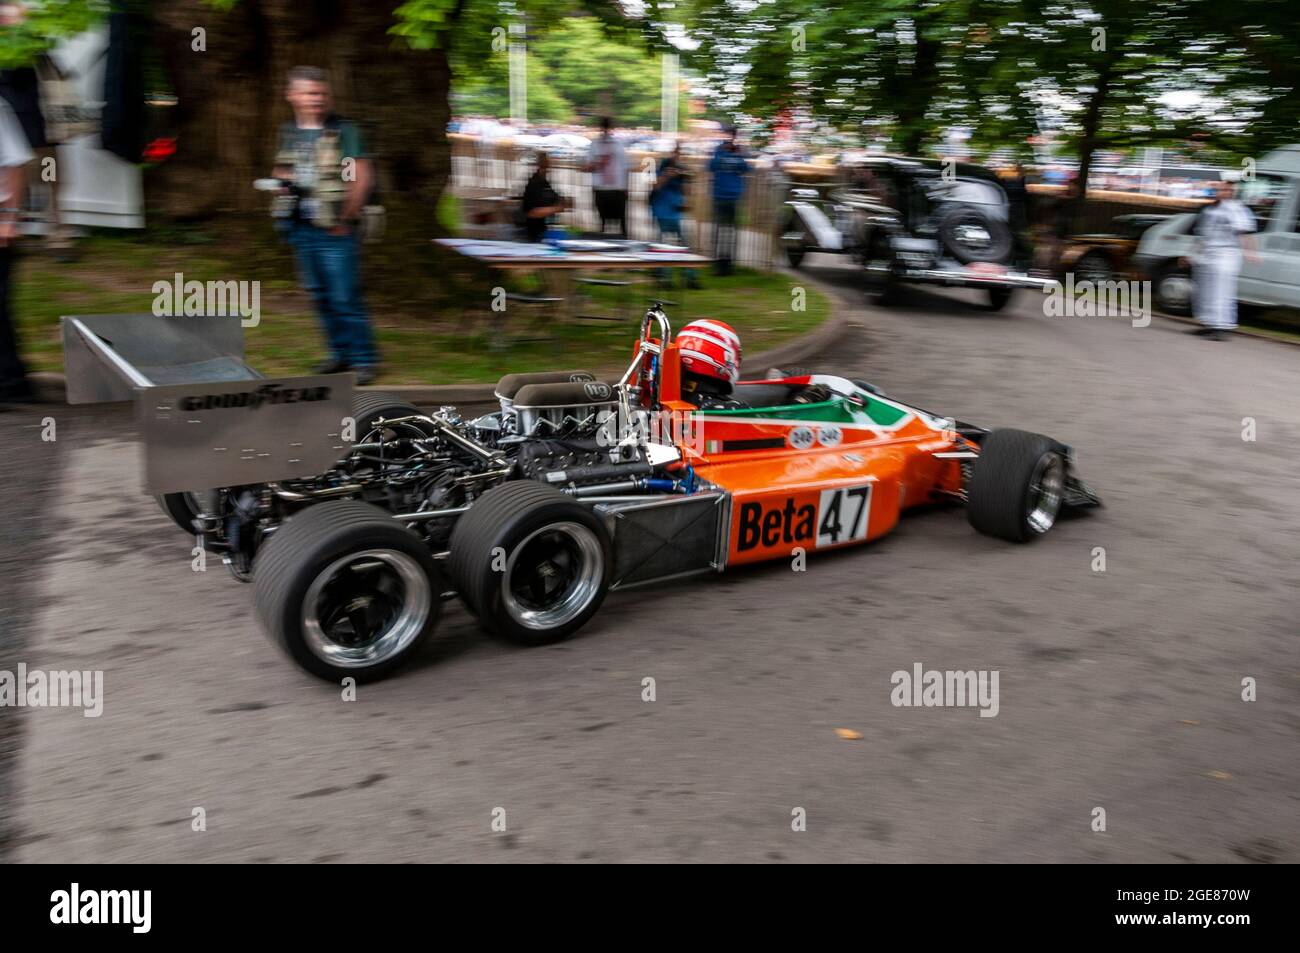 March 2-4-0 experimental six-wheeled Formula One racing car built by March Engineering at the Goodwood Festival of Speed motor racing event. Driving Stock Photo